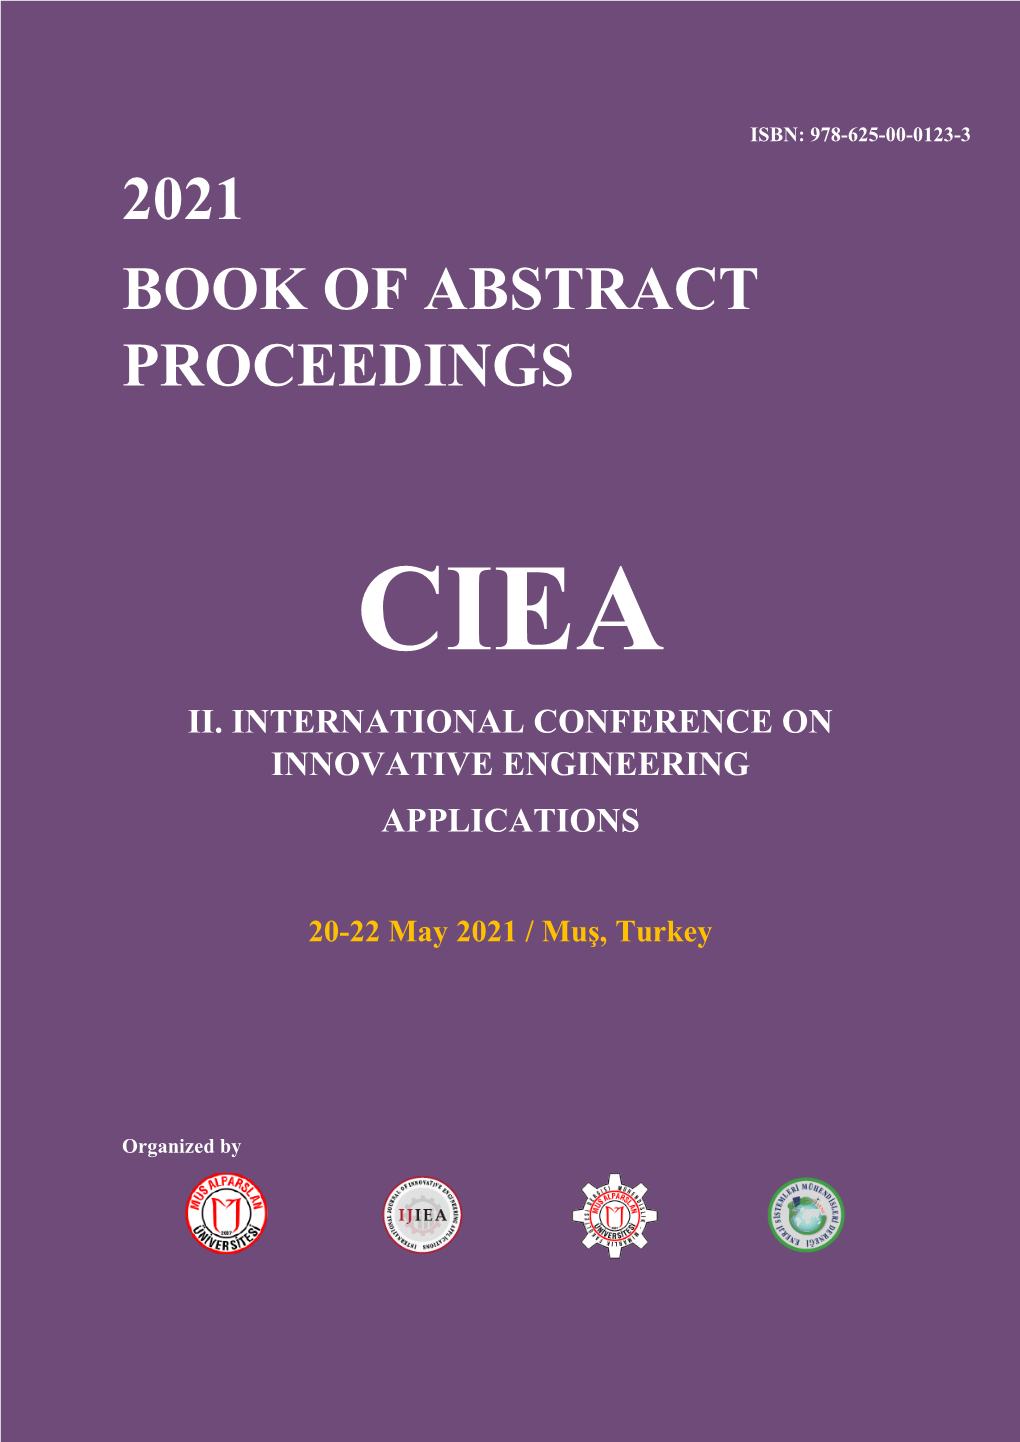 2021 Book of Abstract Proceedings